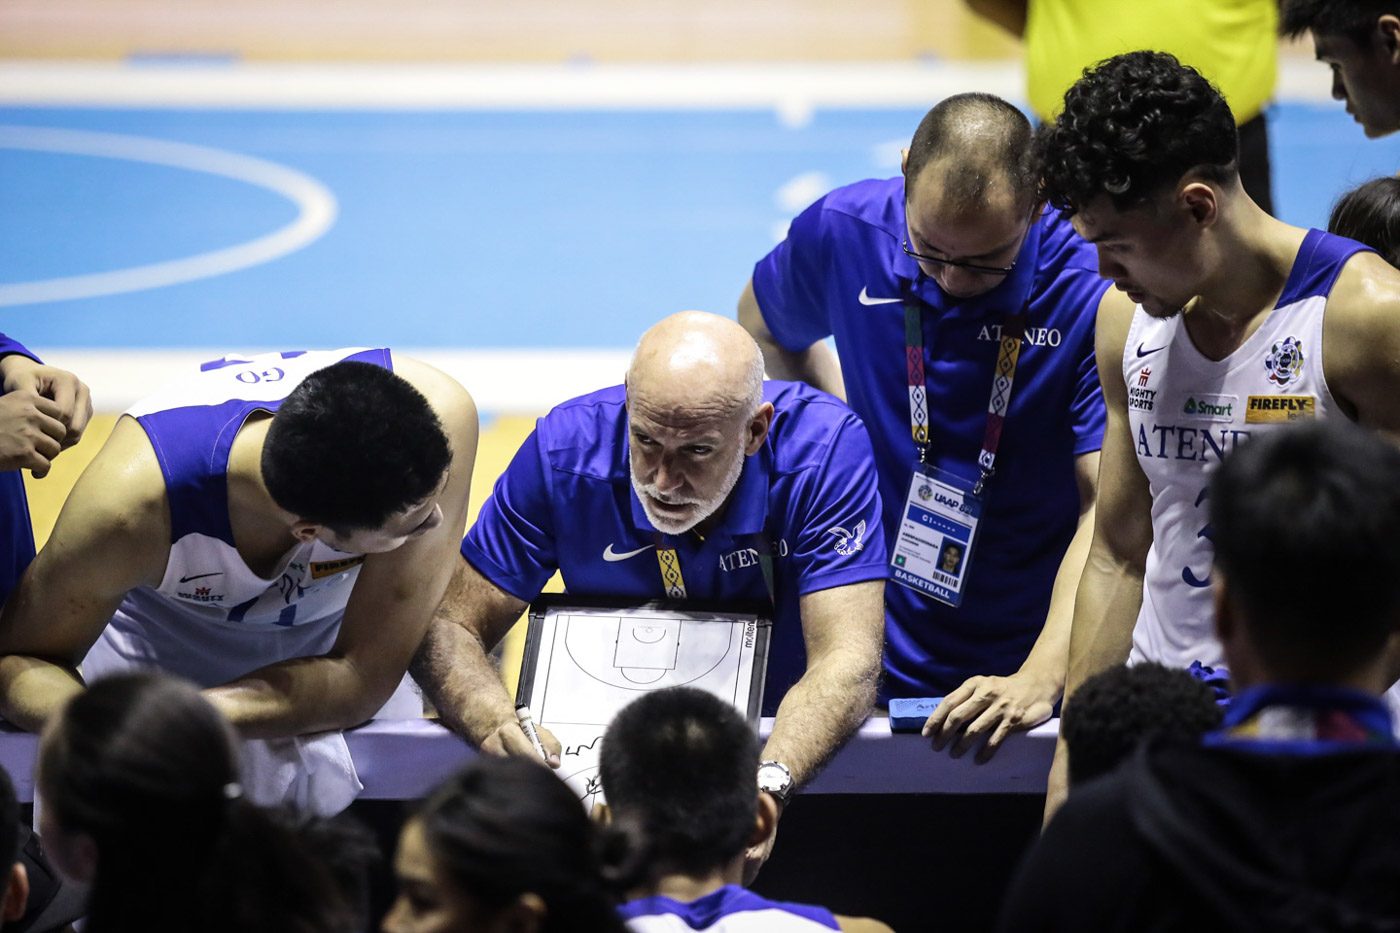 NOT PERFECT. Despite the lopsided game, Ateneo coach Tab Baldwin says there were still lapses: 'We need to play better defense to be the team we want to be.' Photo by Josh Albelda/Rappler  